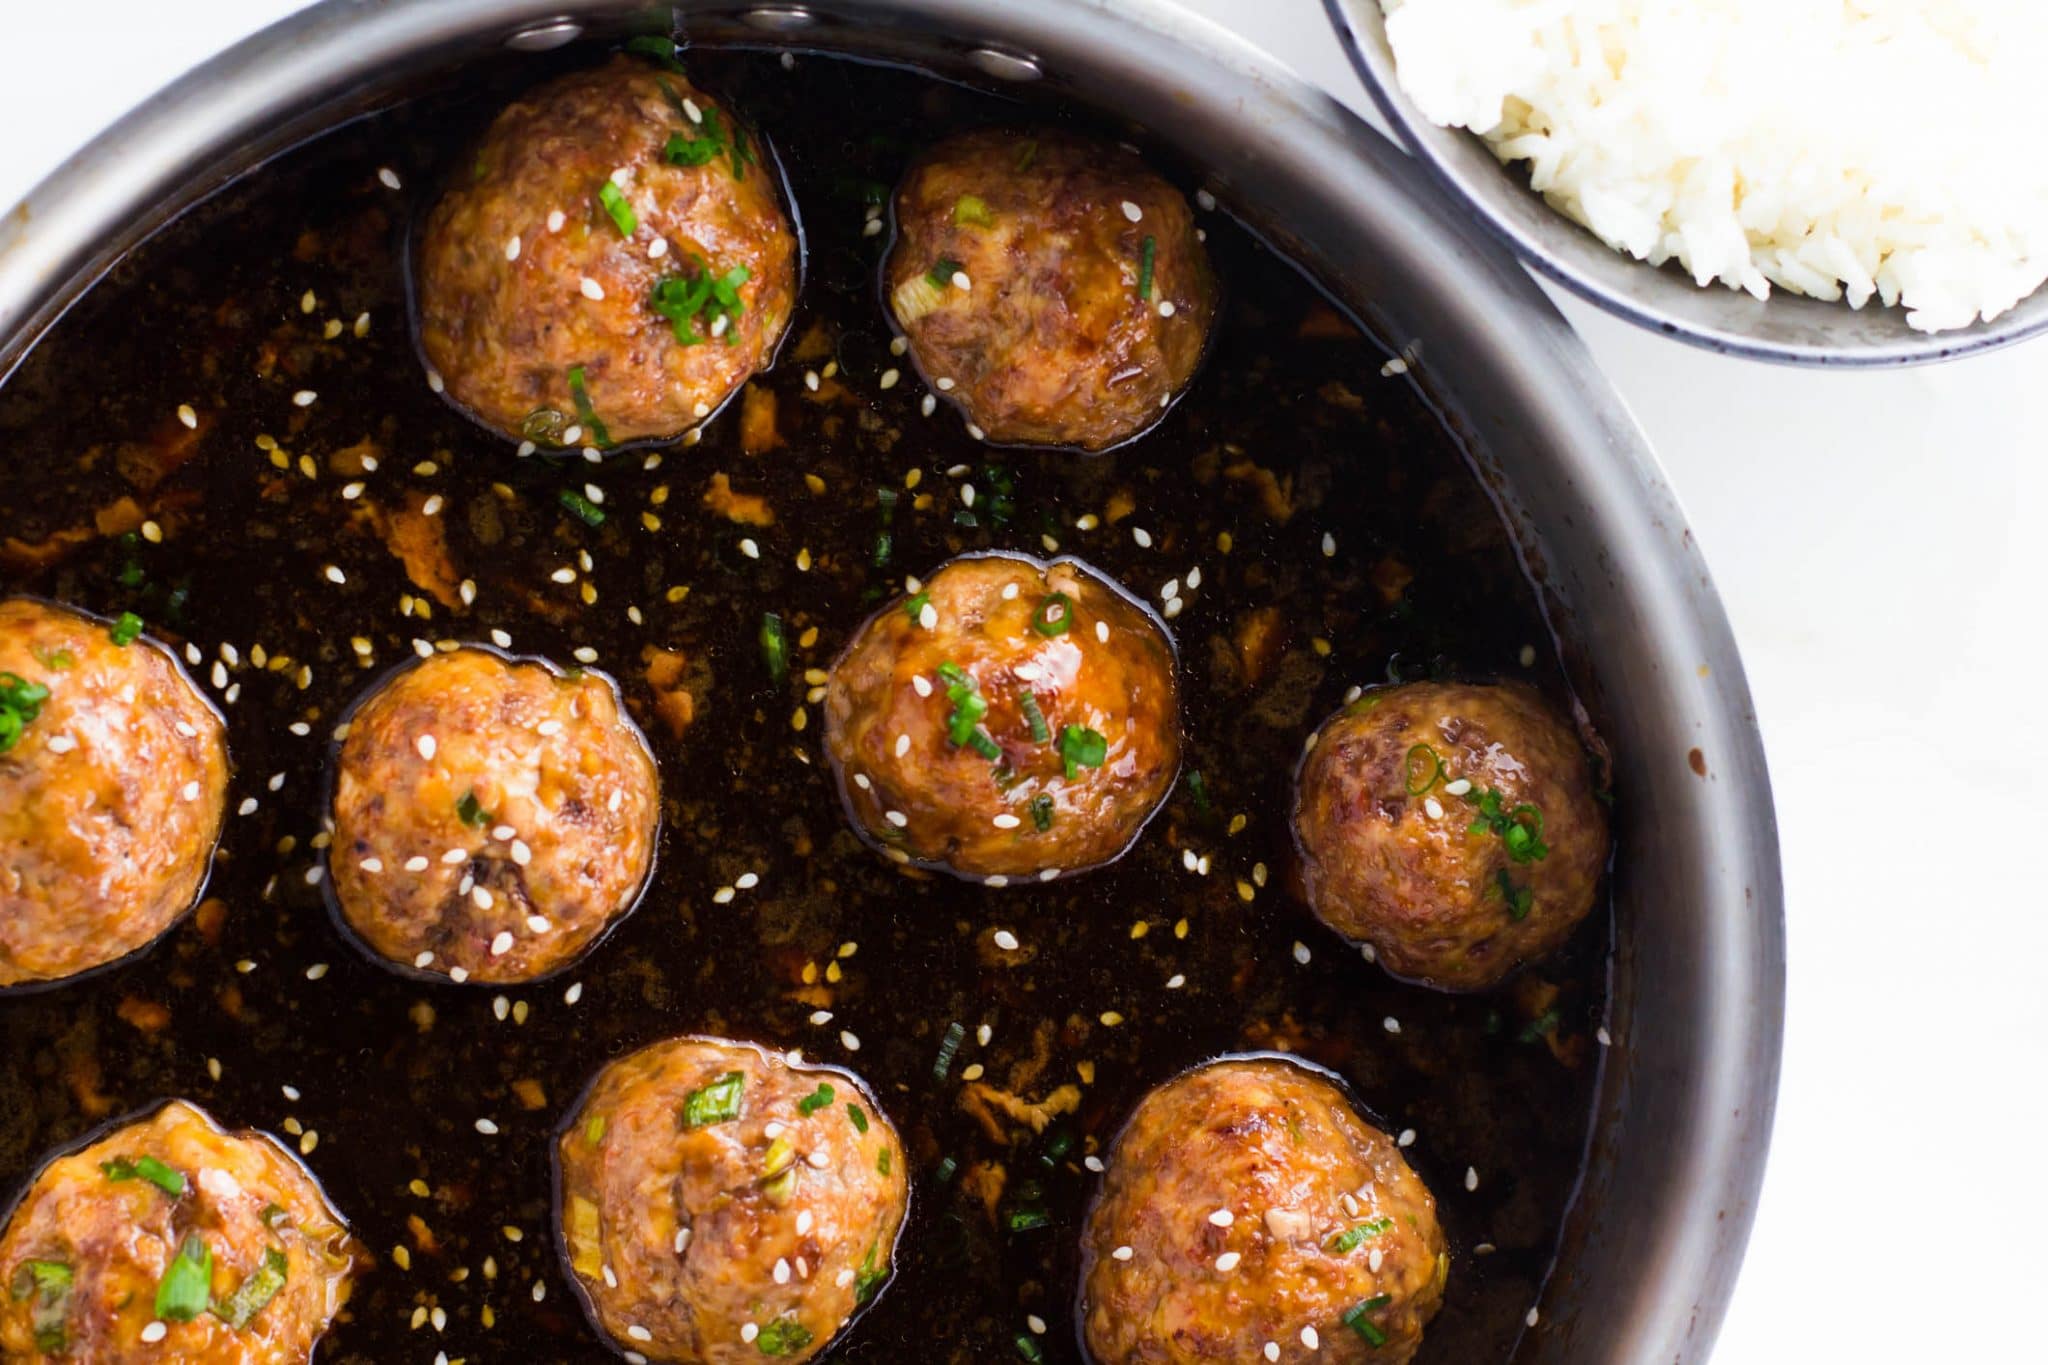 These fun and easy spicy Asian meatballs are juicy, tangy and spicy! They are baked right in the oven and dipped in an uber flavorful glaze to create the perfect party appetizer or a quick dinner!!!